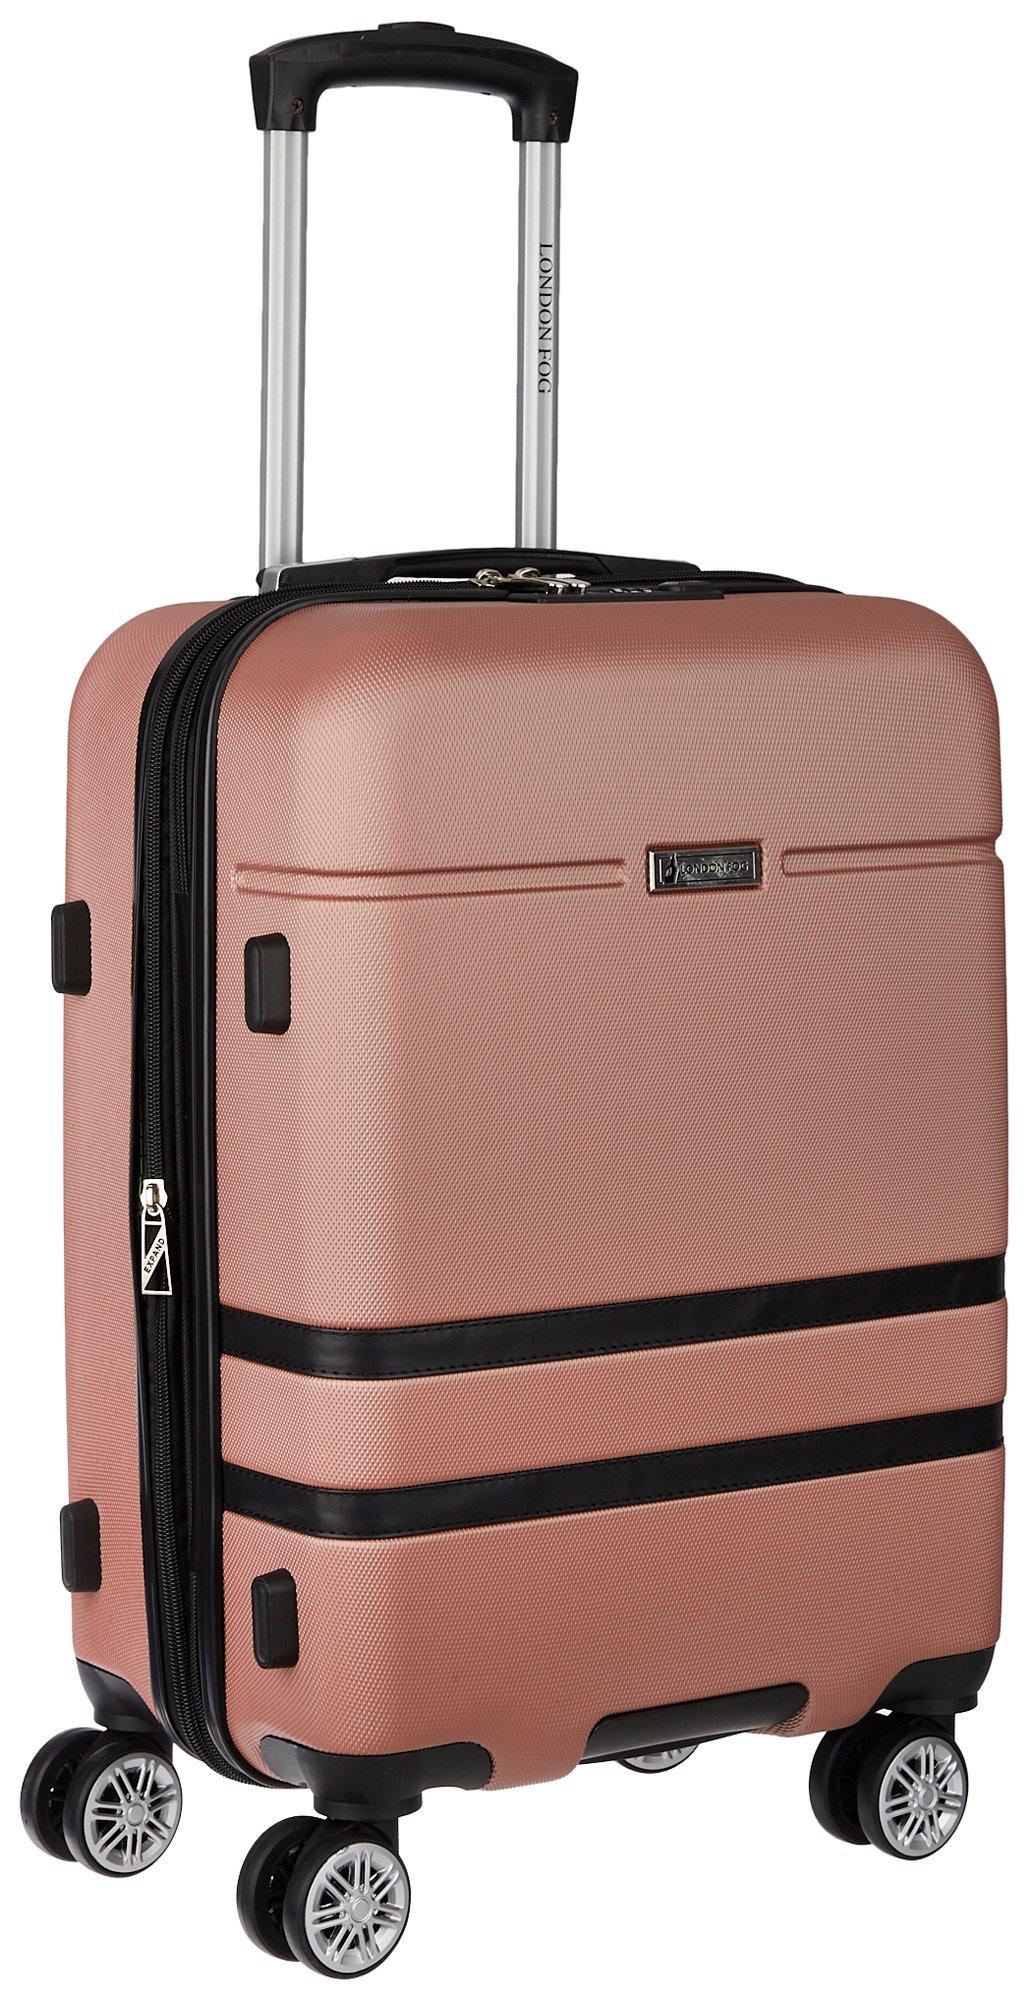 Source Travel Bags Luggage Set Trolley Suitcase 4 Wheels Women Luggage Set  Travel Bag Abs Trolley Luggage Set on m.